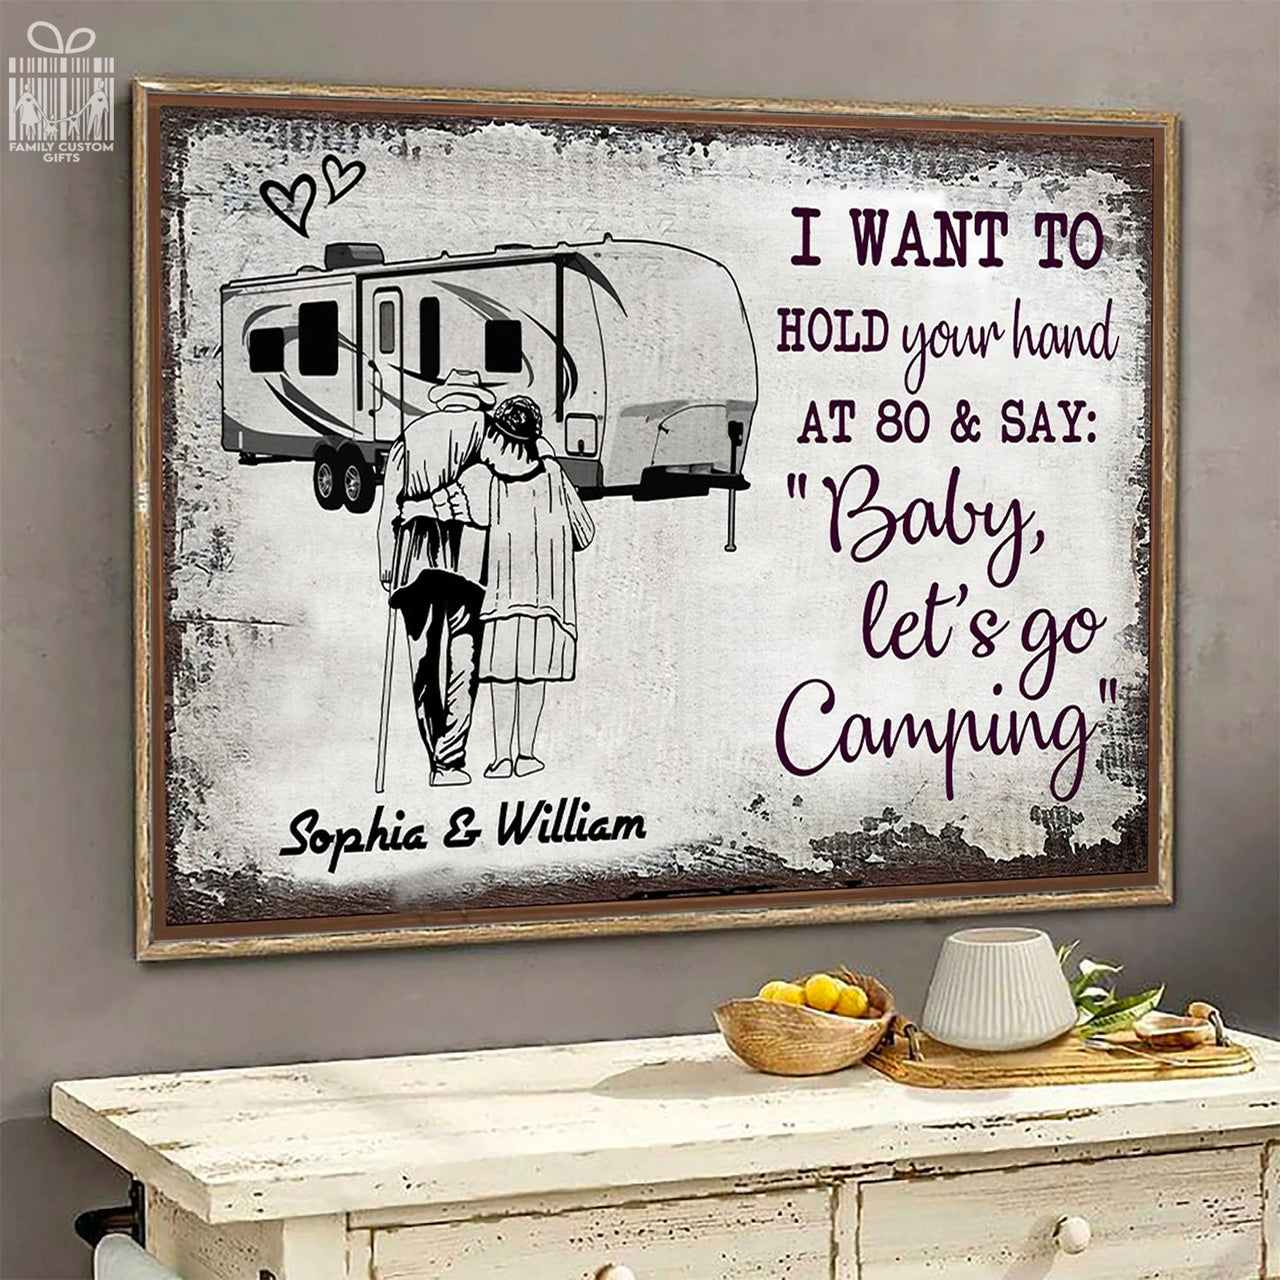 Custom Poster Prints I Want to Hold Your Hand at 80 and Say Let's Go Camping Wall Art for Couple - Premium Poster